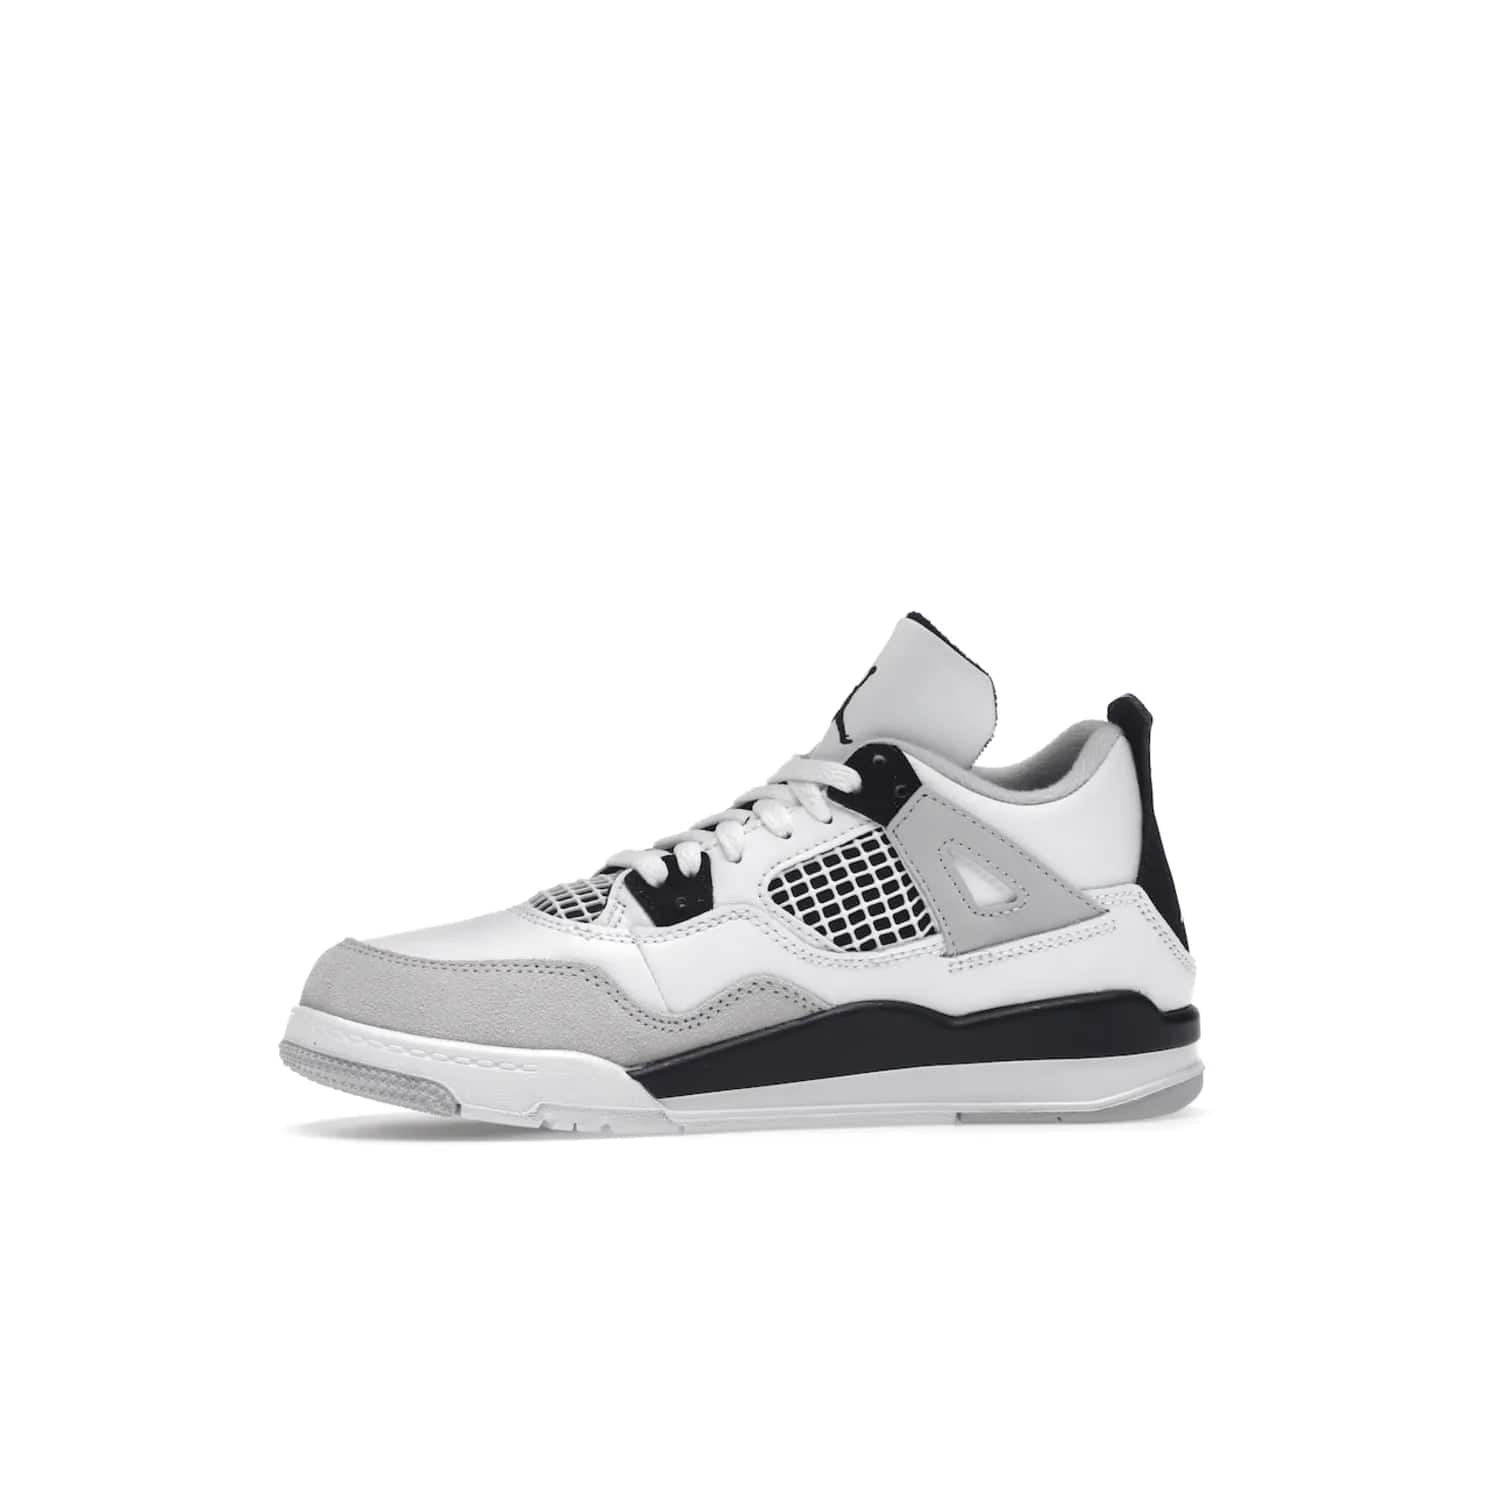 Jordan 4 Retro Military Black (PS) - Image 18 - Only at www.BallersClubKickz.com - Iconic Air Jordan 4 Retro Military Black PS with classic White, Black and Neutral Grey color palette. Mesh panels, adjustable lacing and rubber outsole. Releasing on 21st May 2022 - must-have for any sneaker collection.